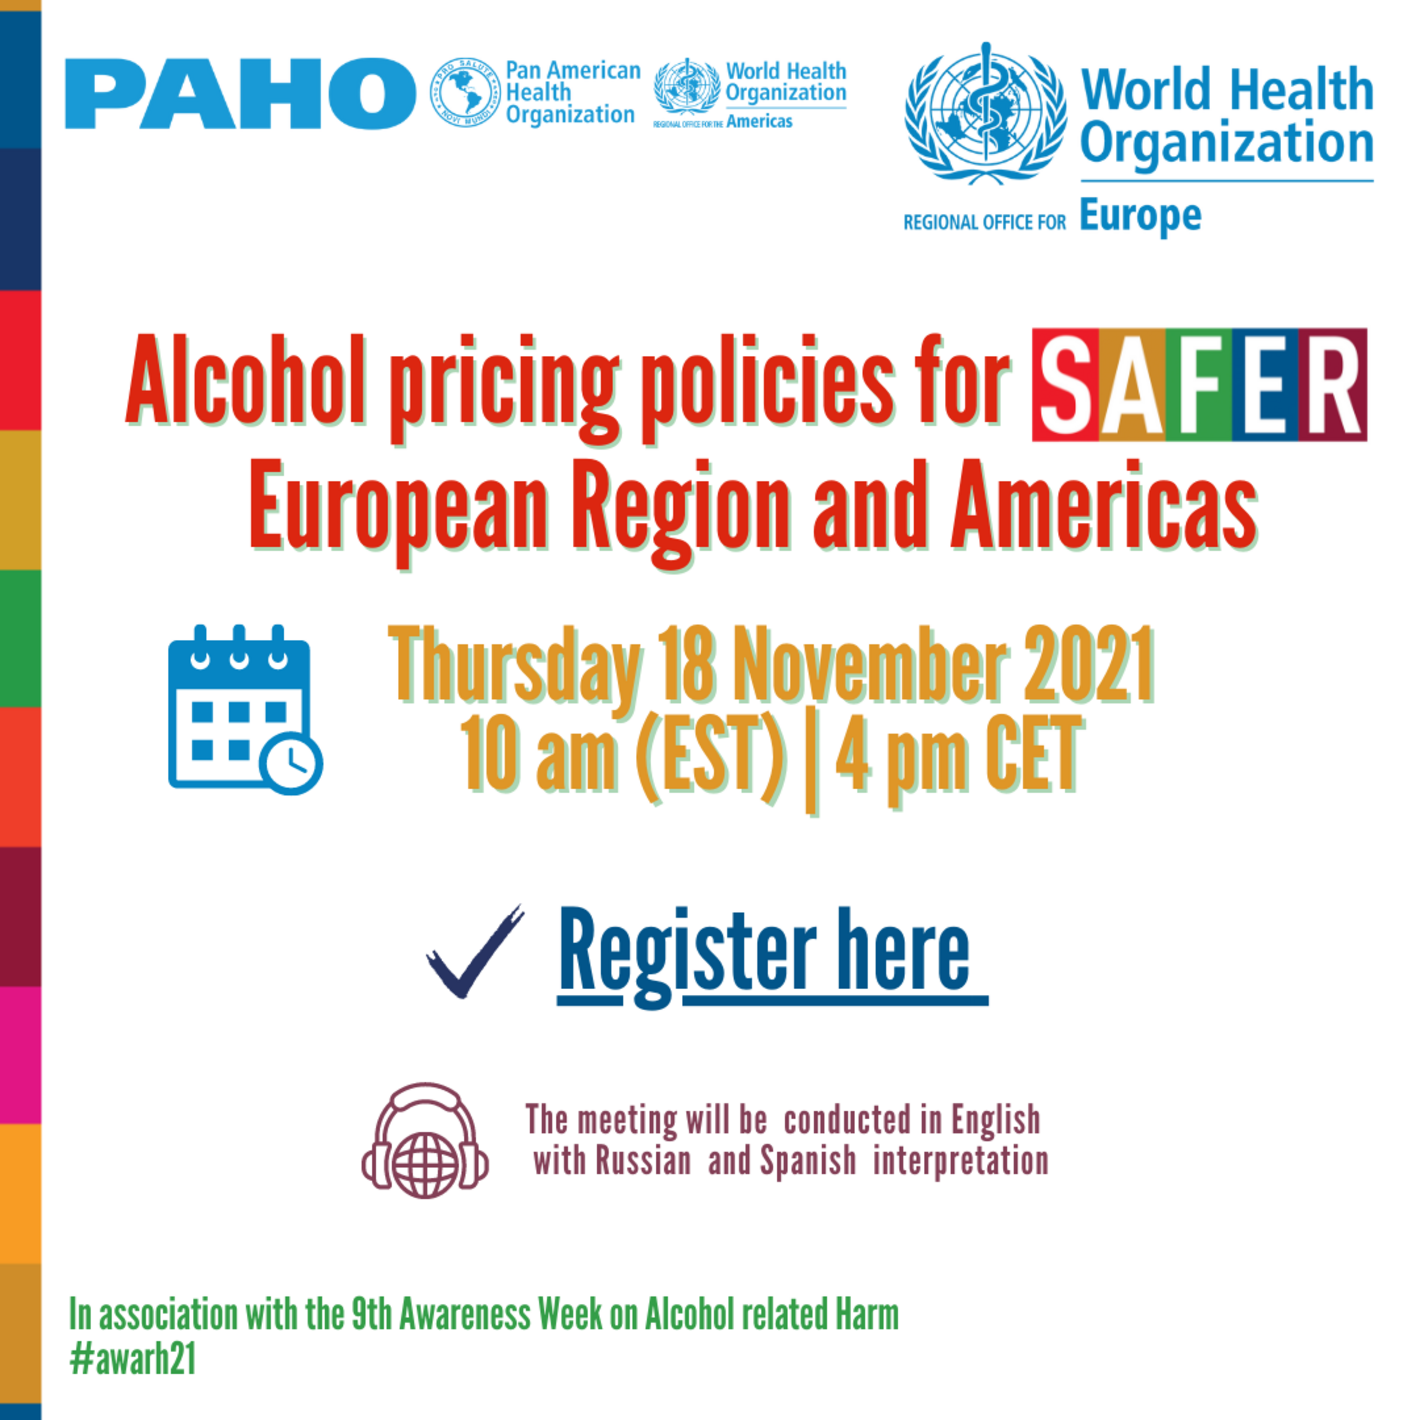 Pricing policies for SAFER European Region and Americas